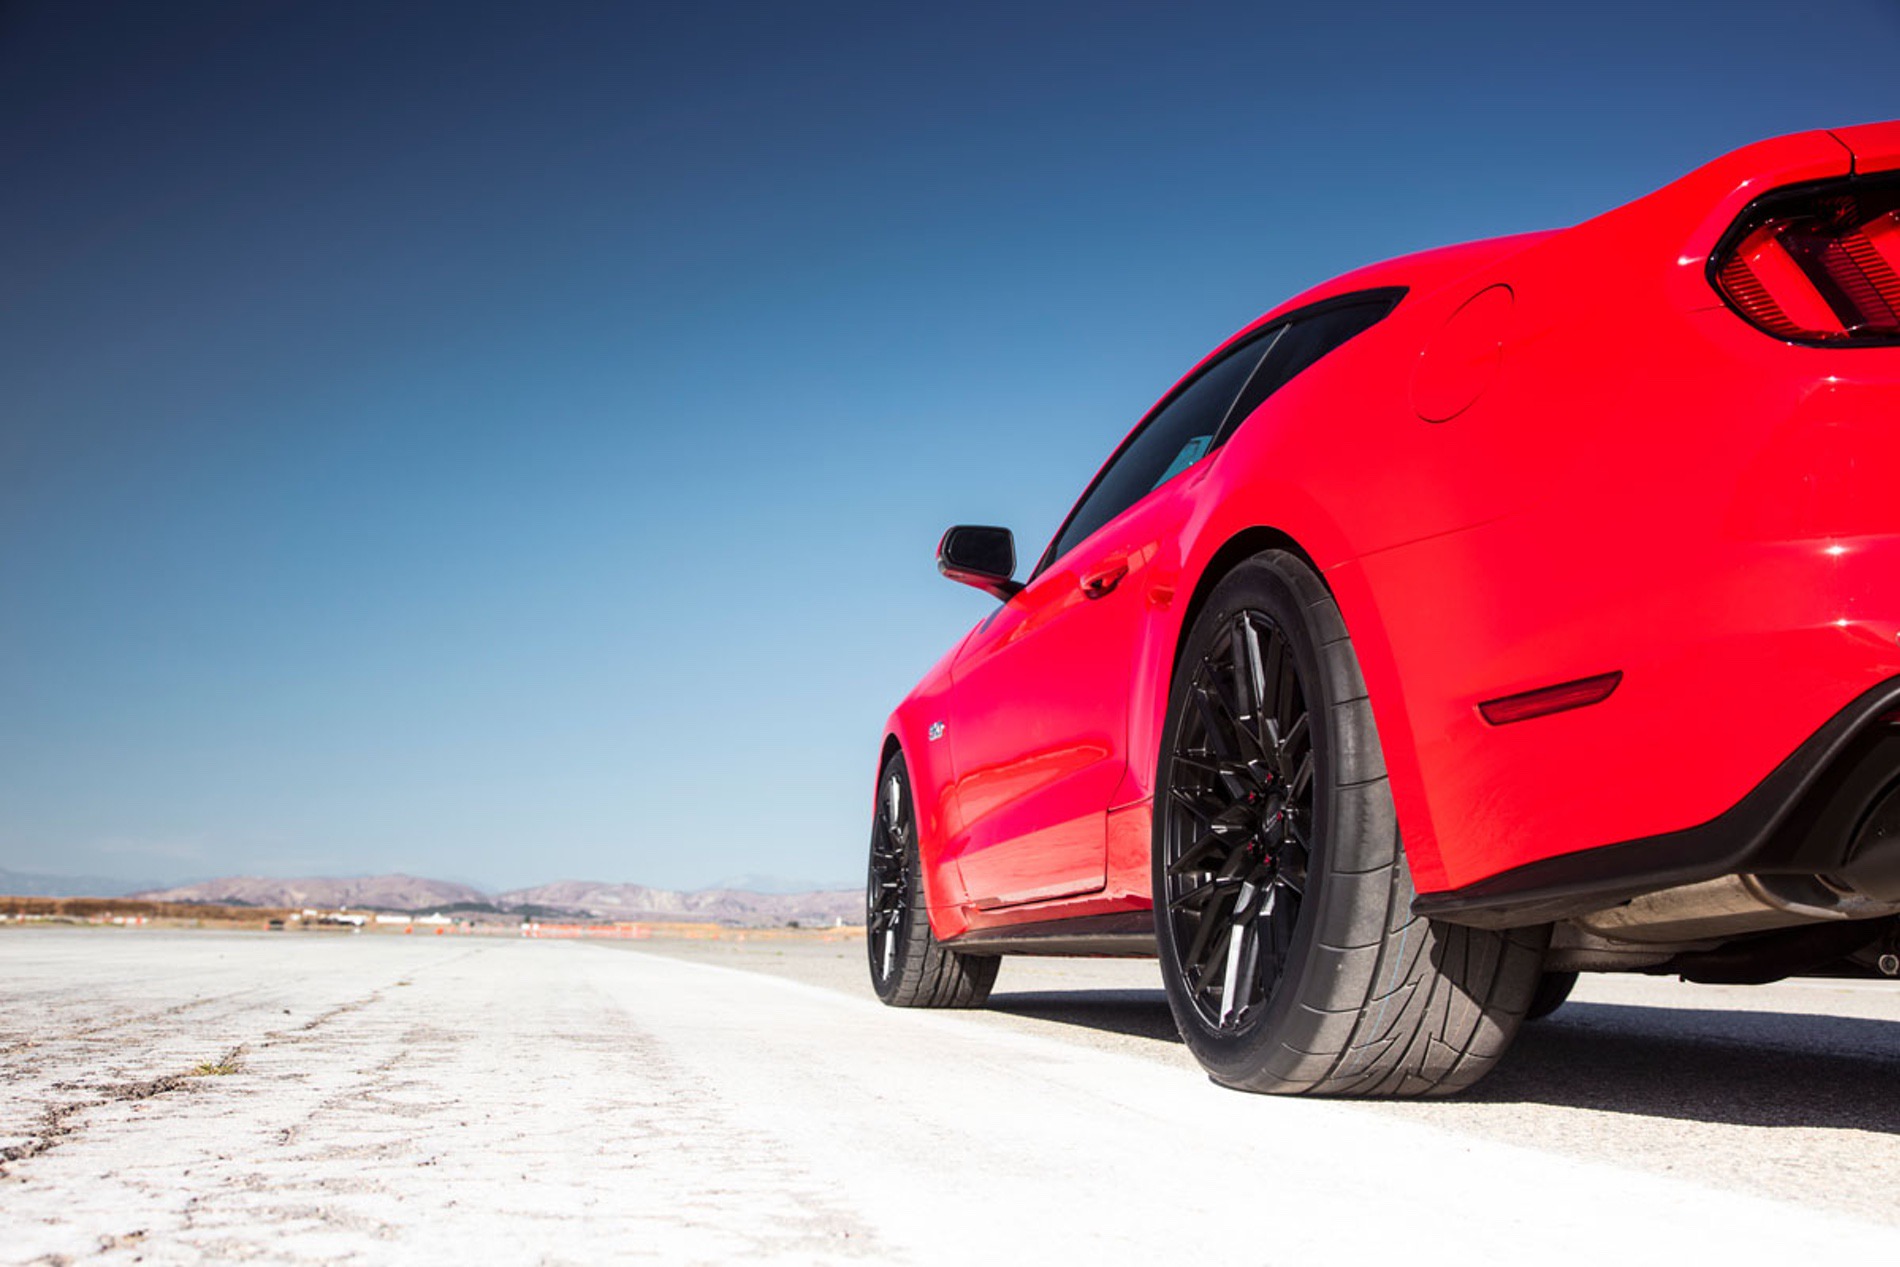 Tires on one side of Ford Mustang in desert